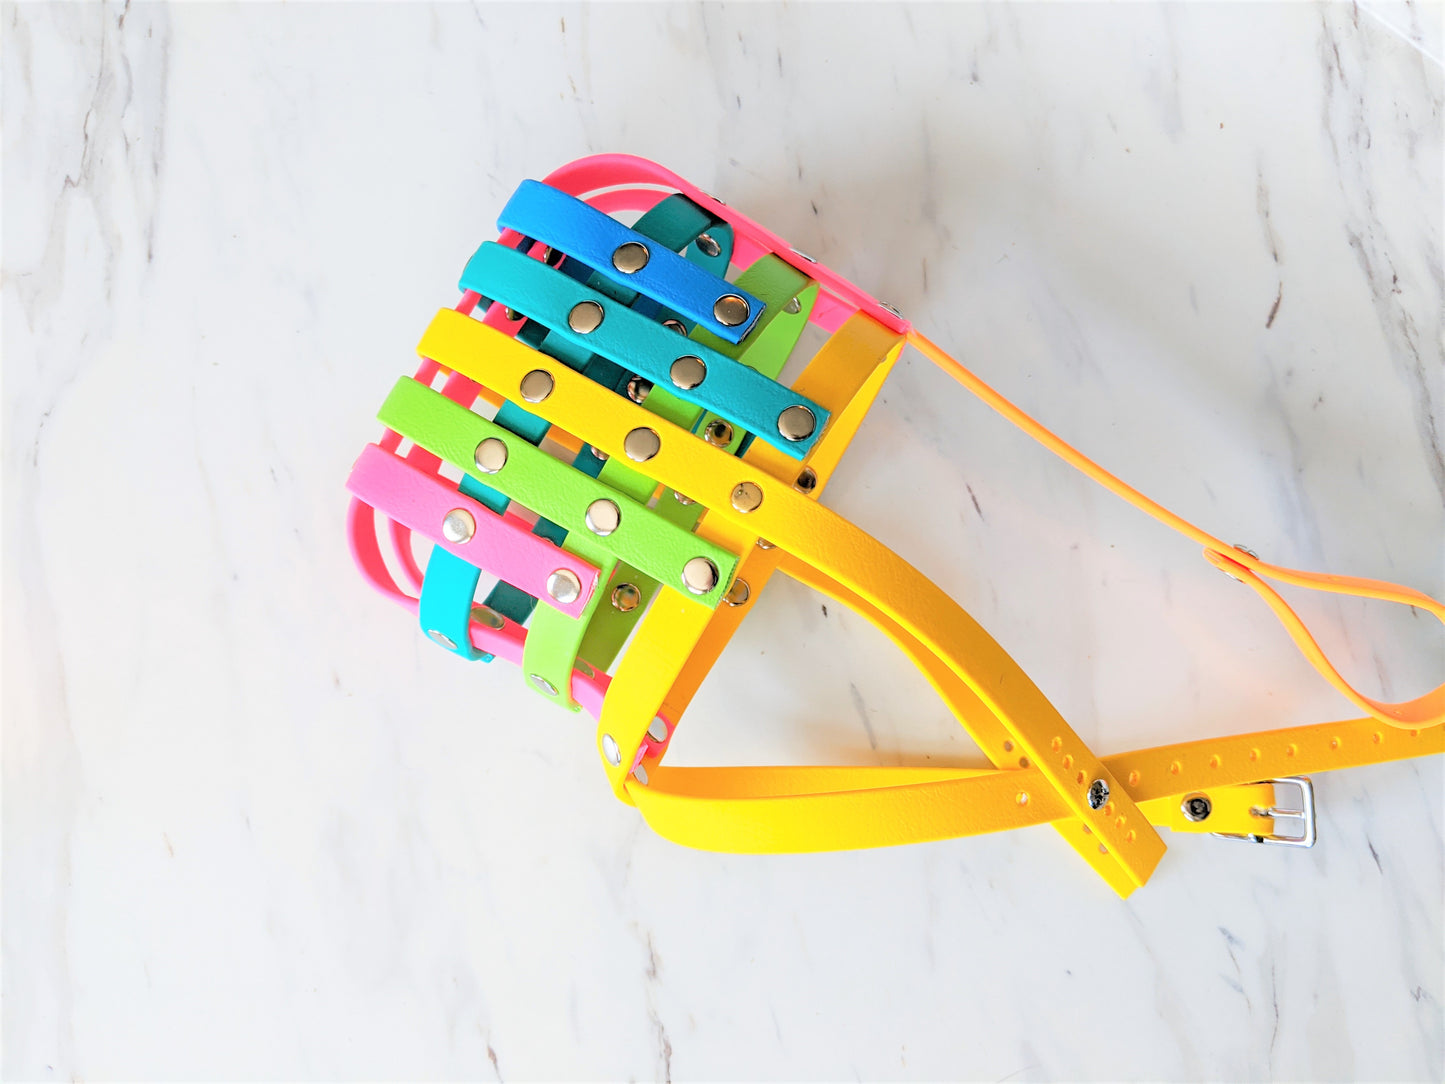 Basket Style Biothane Muzzle with Forehead Strap- Choose your colors- Level Two